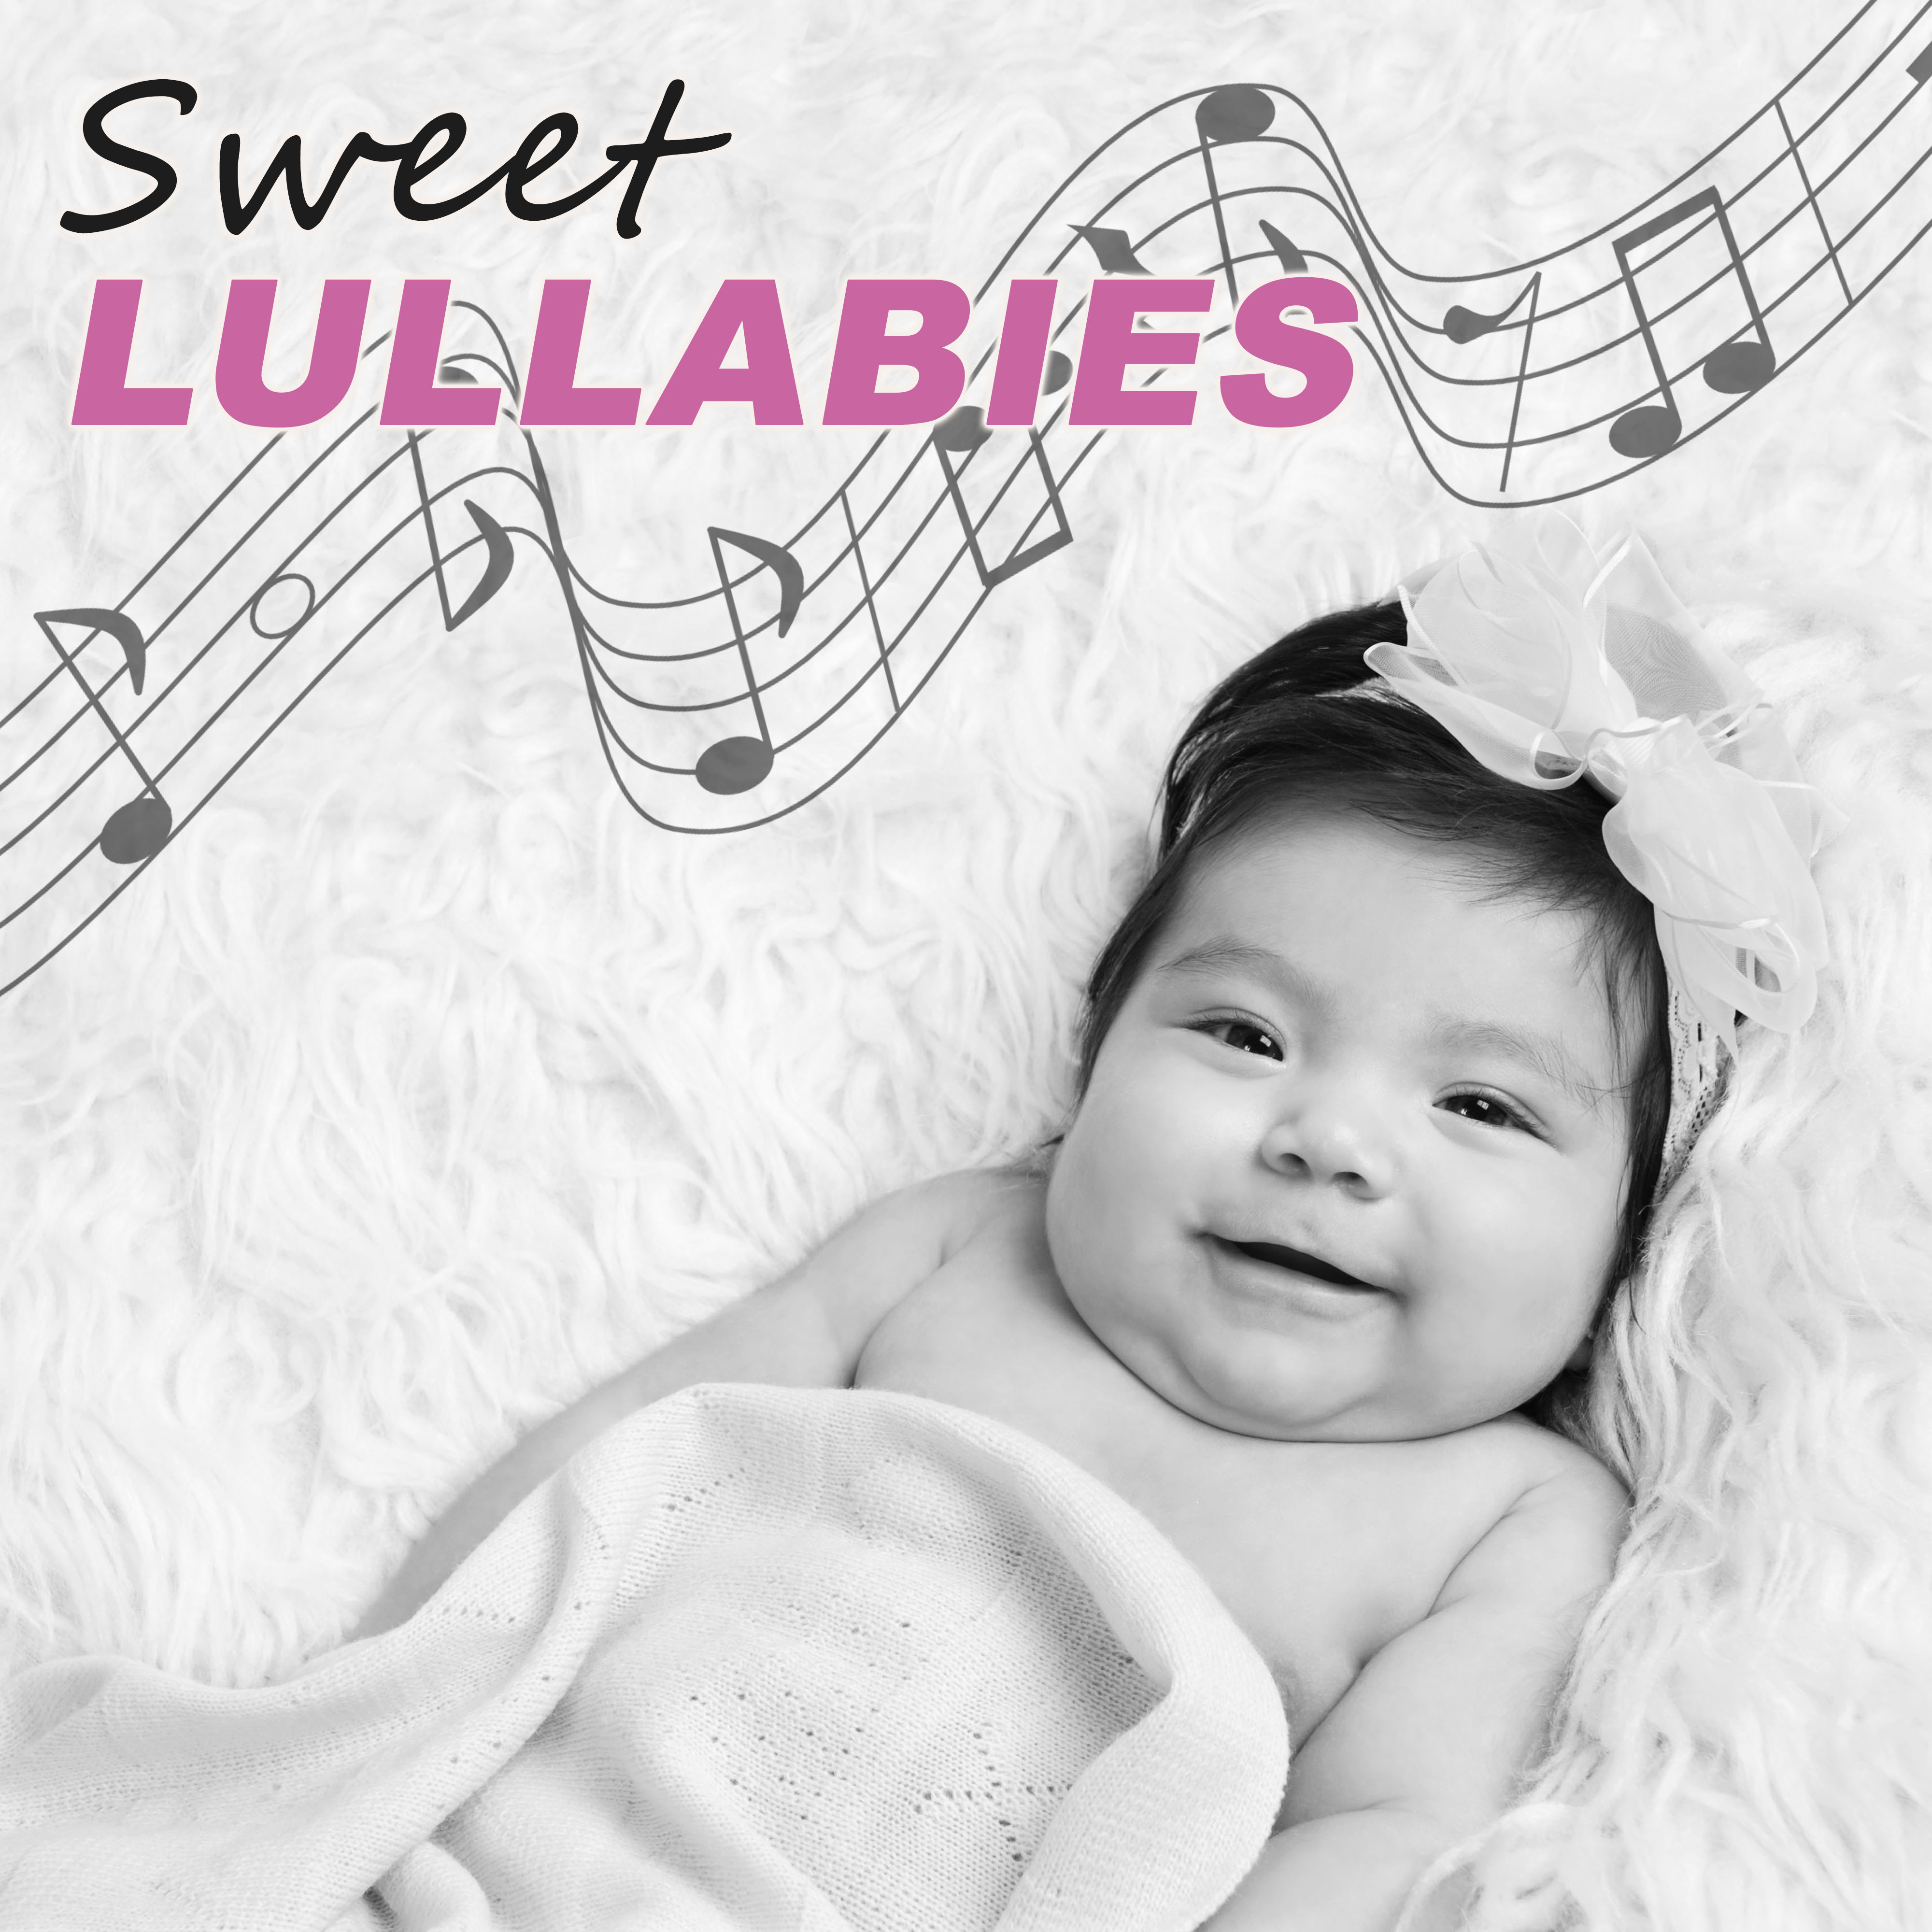 Sweet Lullabies  Lullabies for Newborns, Helpful to Calm Your Baby and Easily Fall Asleep, Best Background for Baby Massage,  Nature Sounds to Relieve Stress, Help Your Baby Sleep Through the Night